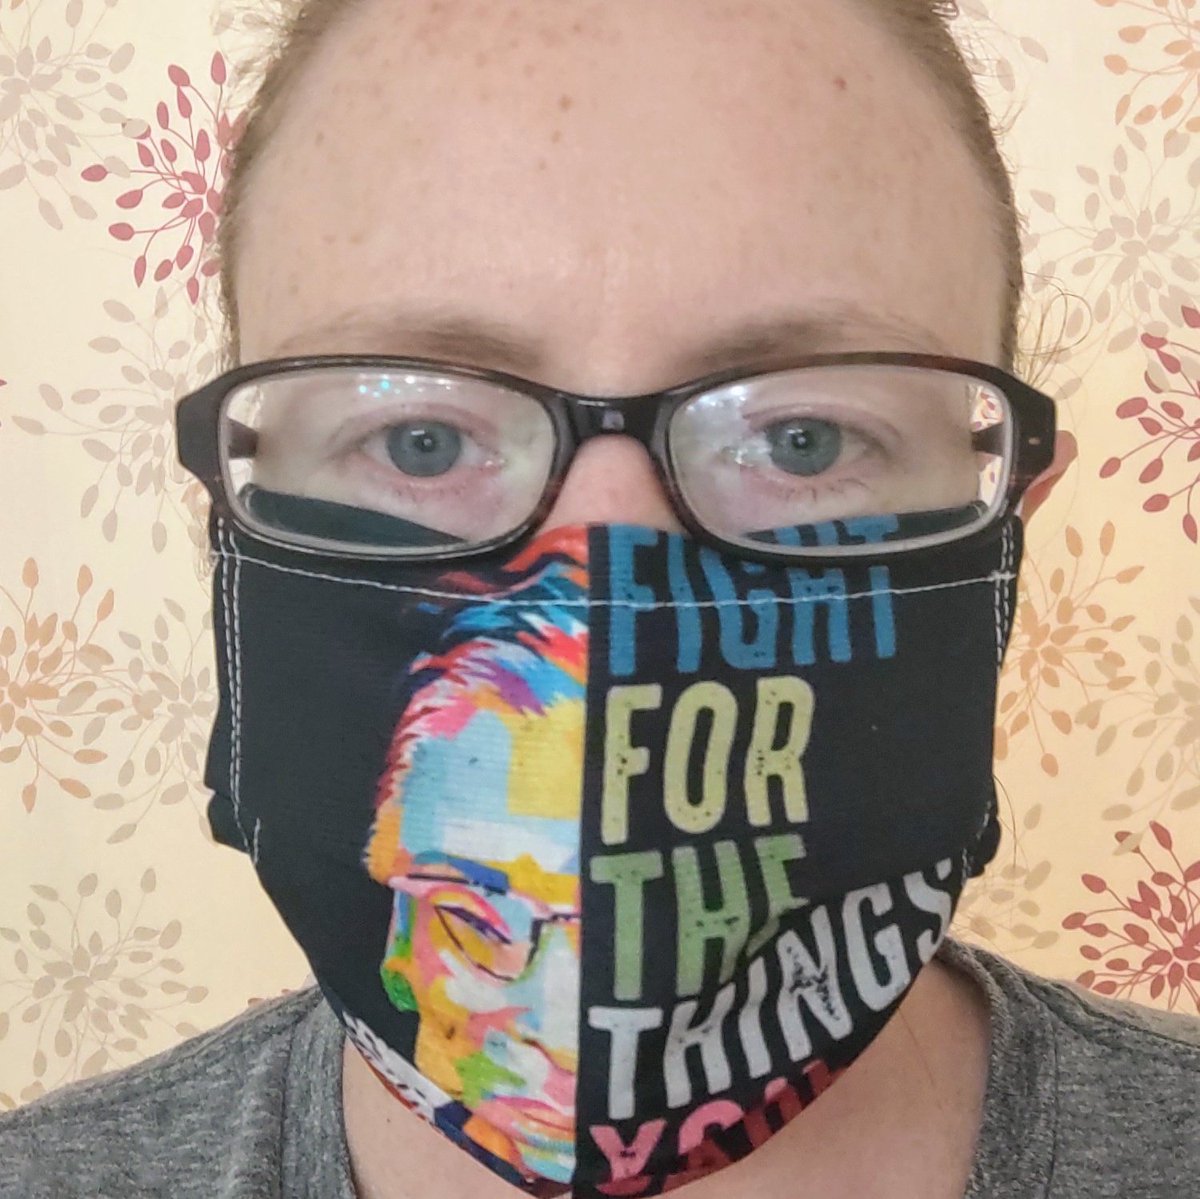 #NewProfilePic #rbg #rbglife #fightforthethingsyoucareabout